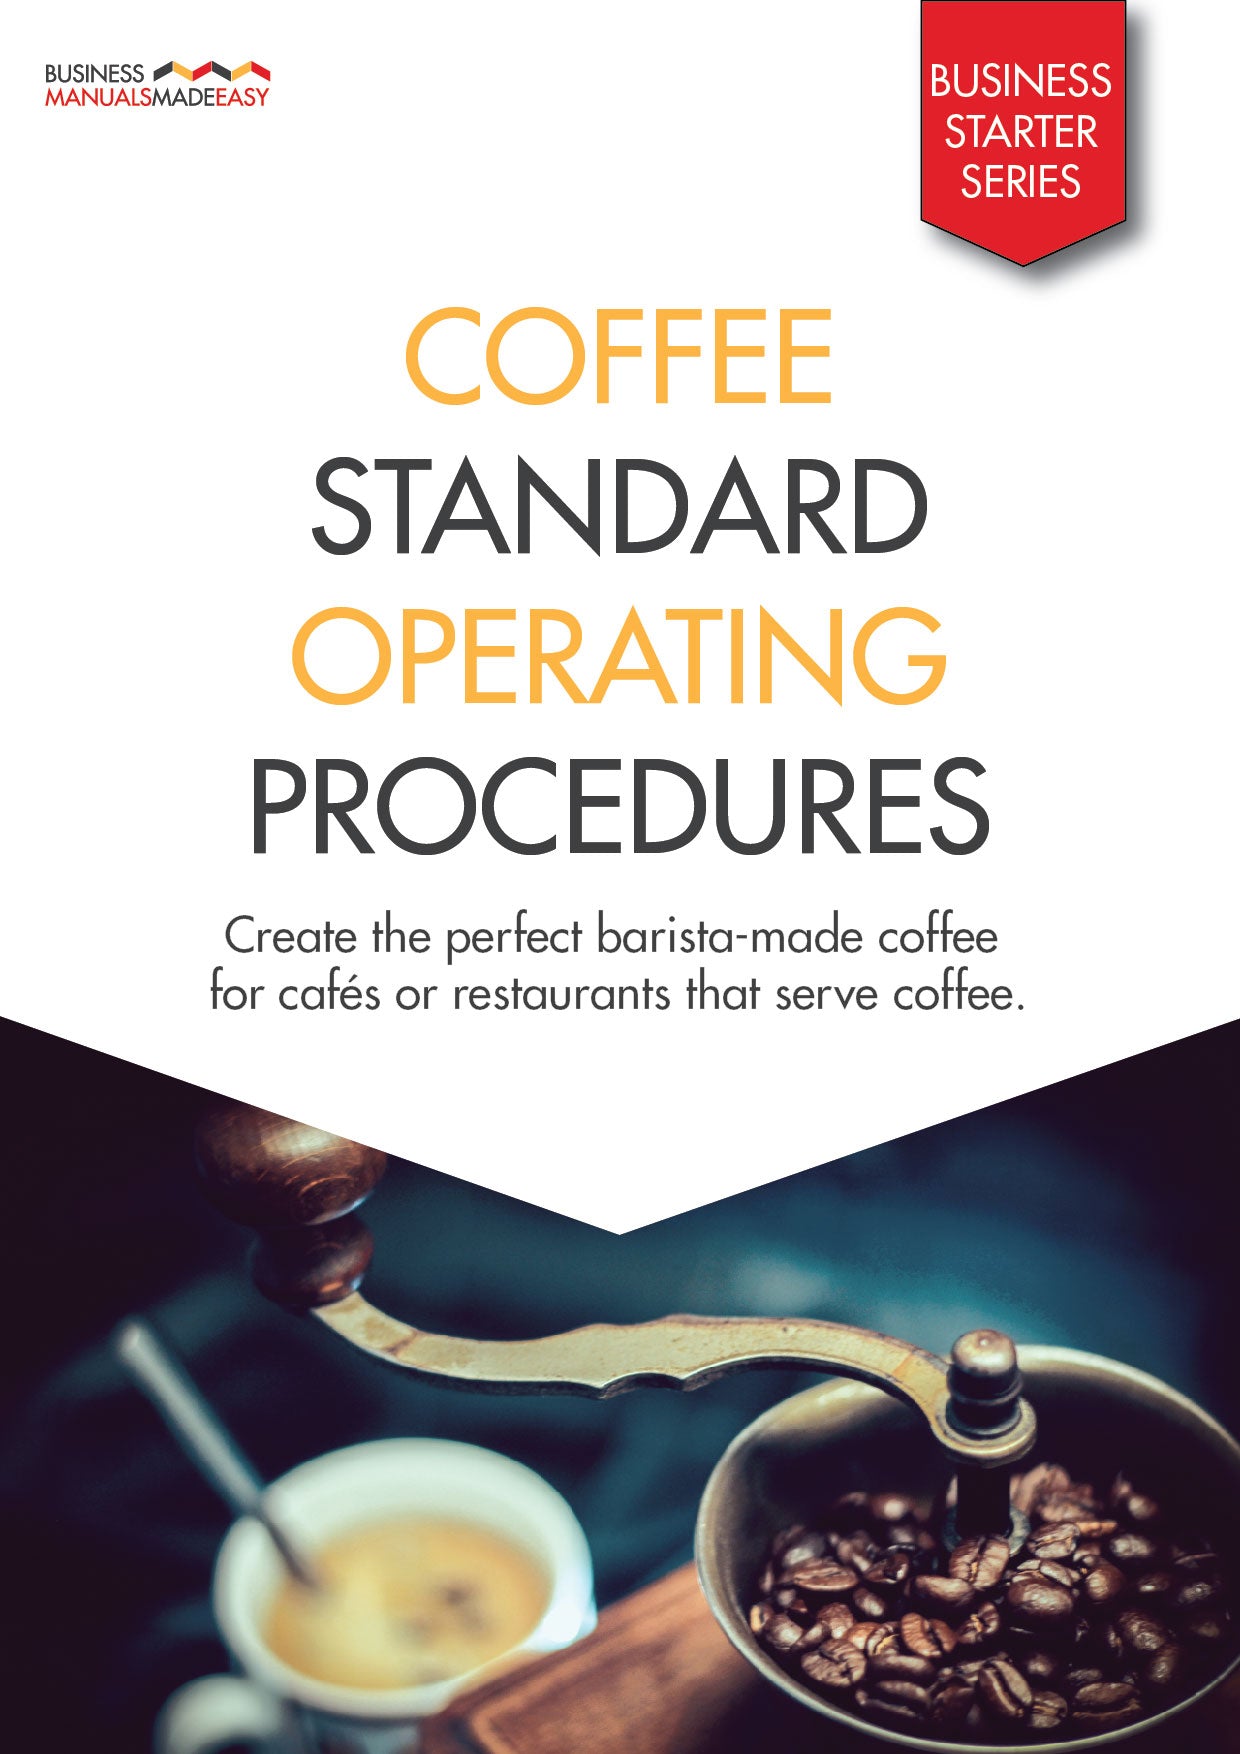 Business Manuals Made Easy: Coffee Standard Operating Procedures. This manual includes coffee recipes, instructions for setting up, cleaning, and closing a coffee machine and probe milk thermometer calibration. Benefits is standard procedures for easy delegation, consistency and expectation of tasks Increase workplace/team/staff effectiveness, therefore reducing wastage and costs.